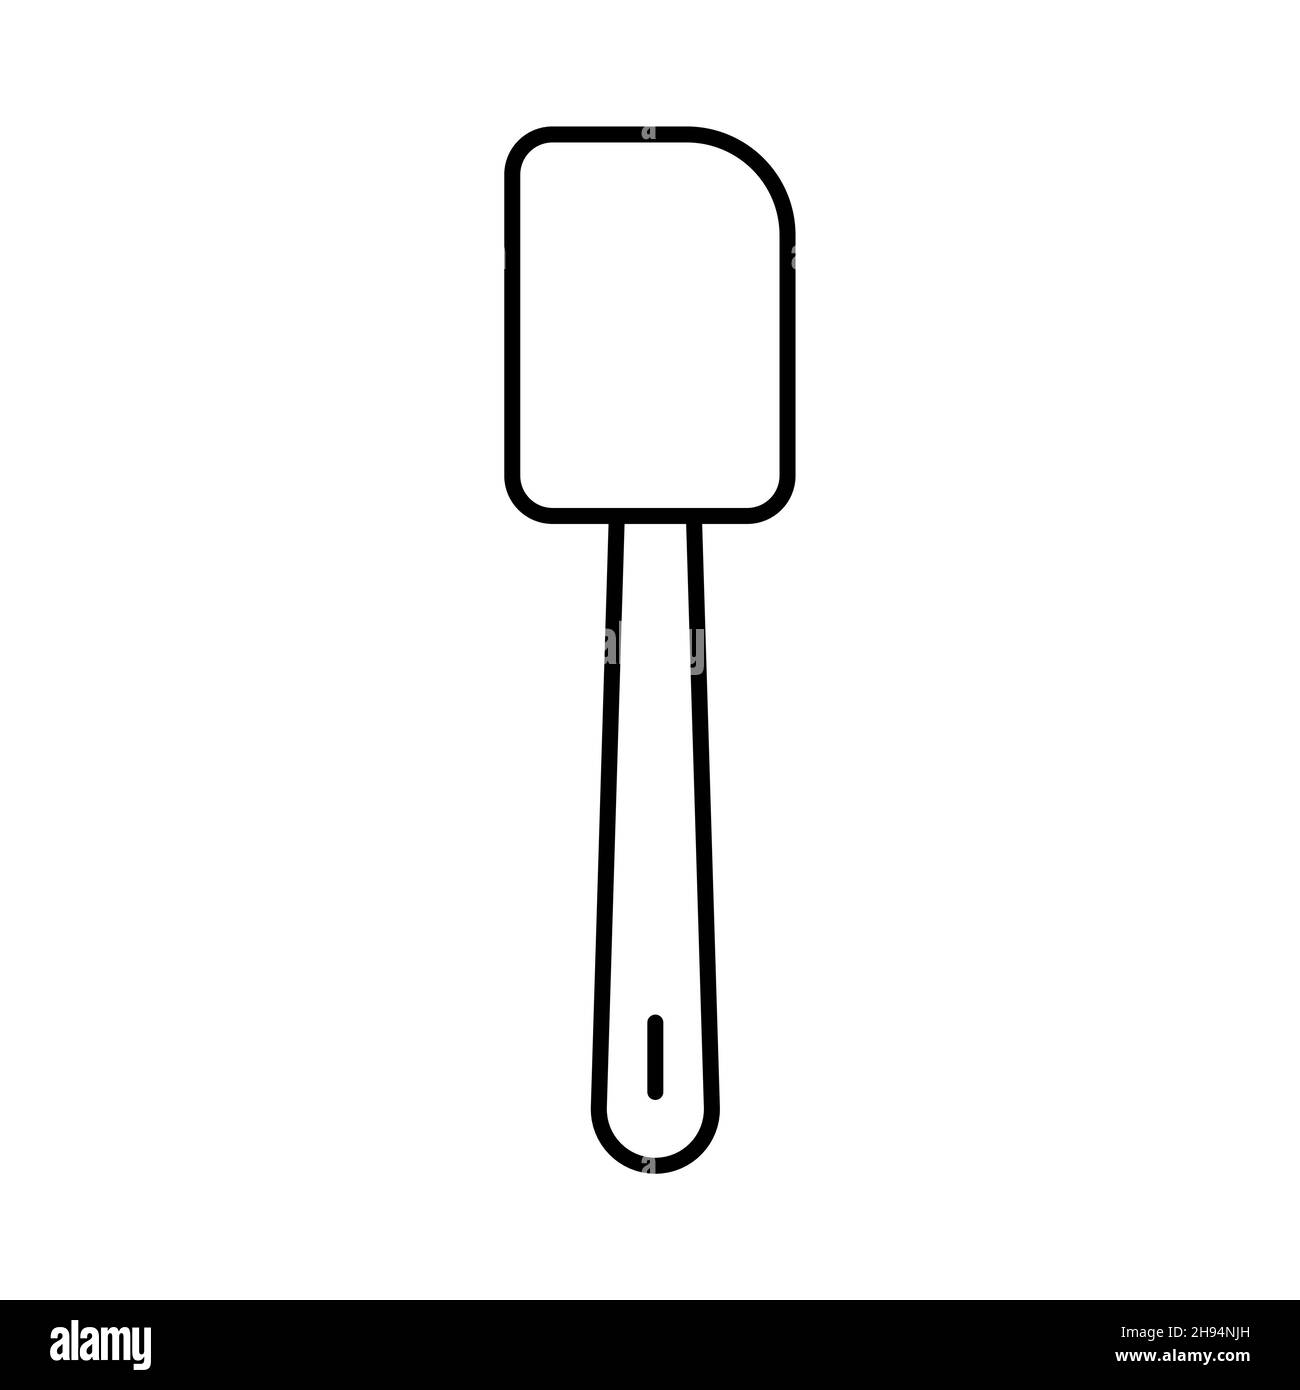 https://c8.alamy.com/comp/2H94NJH/outline-simple-vector-kitchen-spatula-icon-isolated-on-white-background-eps-10-2H94NJH.jpg